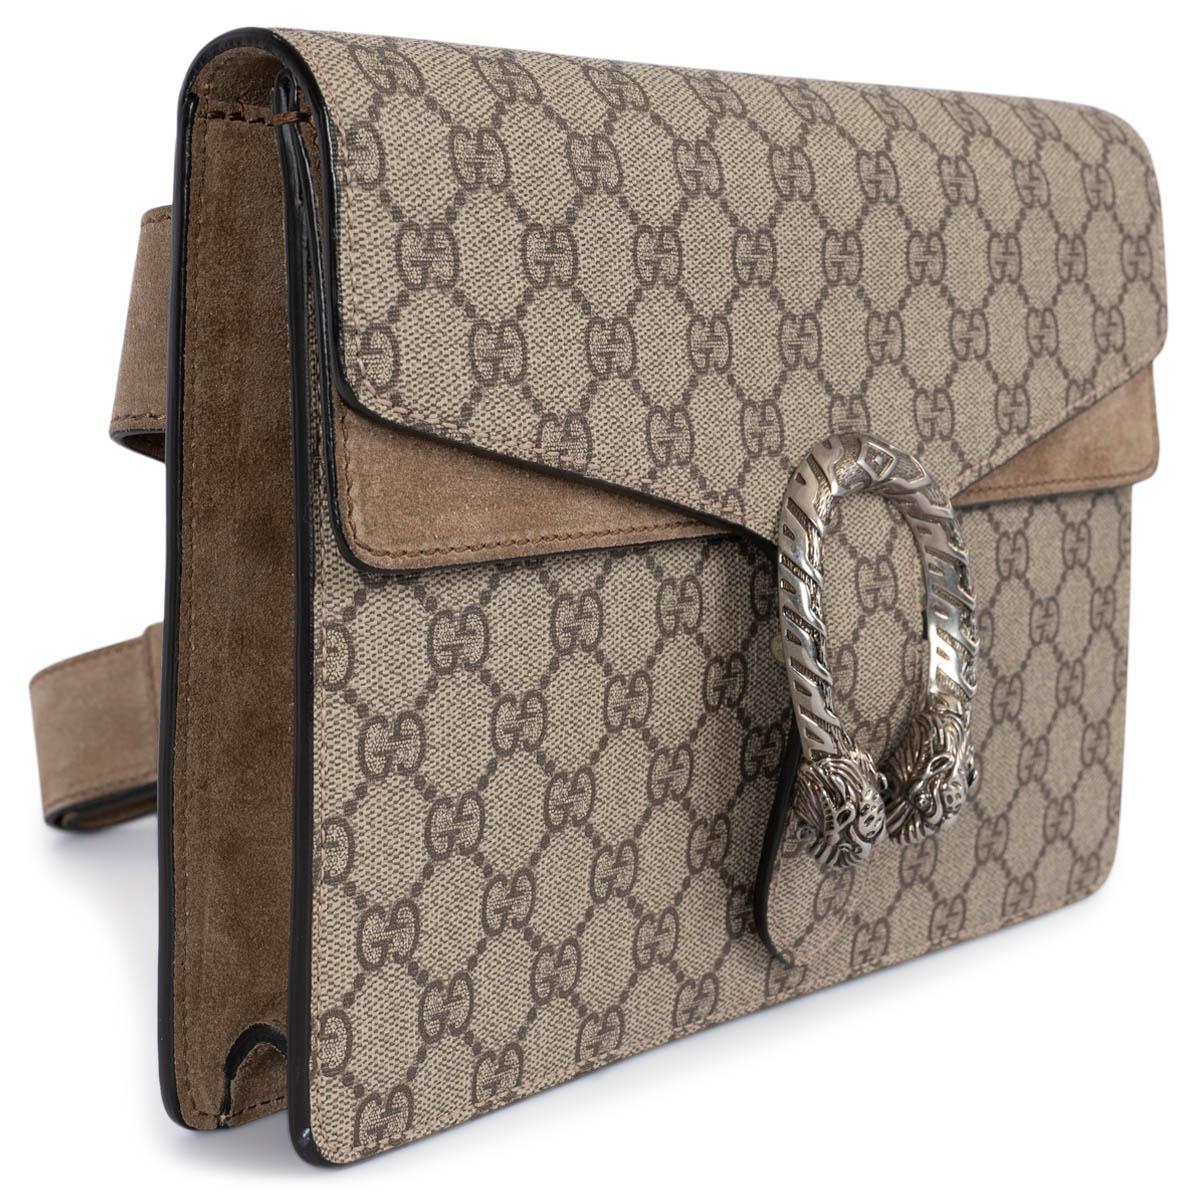 100% authentic Gucci Dionysus belt bag in taupe and brown GG Supreme canvas and beige suede leather. The design features silver-tone hardware come with an open pocket under the flap. Lined in beige suede. Can be worn as a belt bag or crossbody. Has